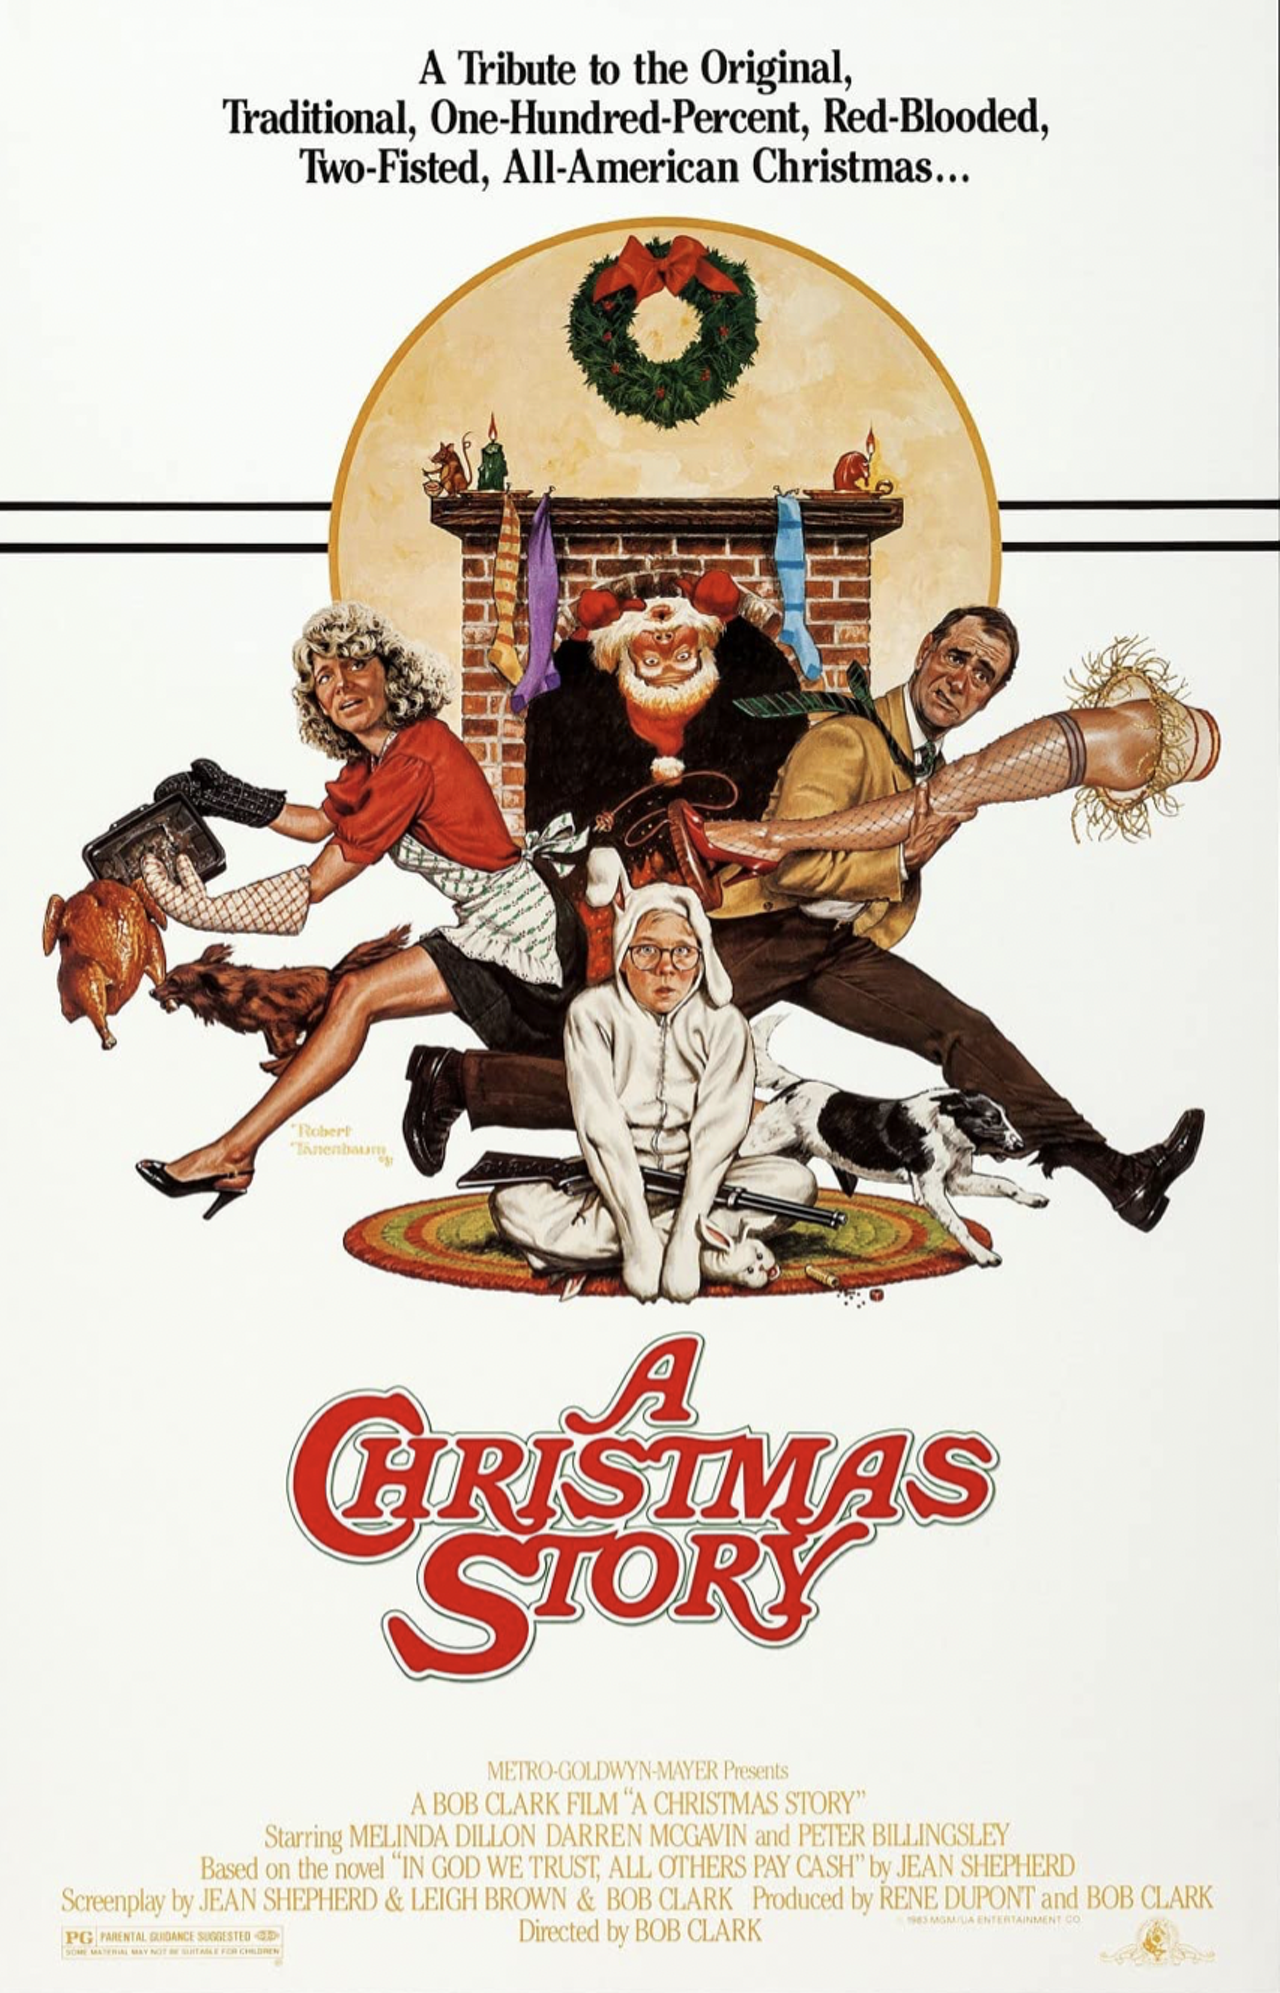   A Christmas Story  (1983) 
This 1983 Christmas classic split its filming time between Cleveland and Canada and is actually said to take place in Indiana, but it's become synonymous with its familiar Cleveland settings — particularly the Parker family home, which you can visit in Tremont year-round, seven days a week.